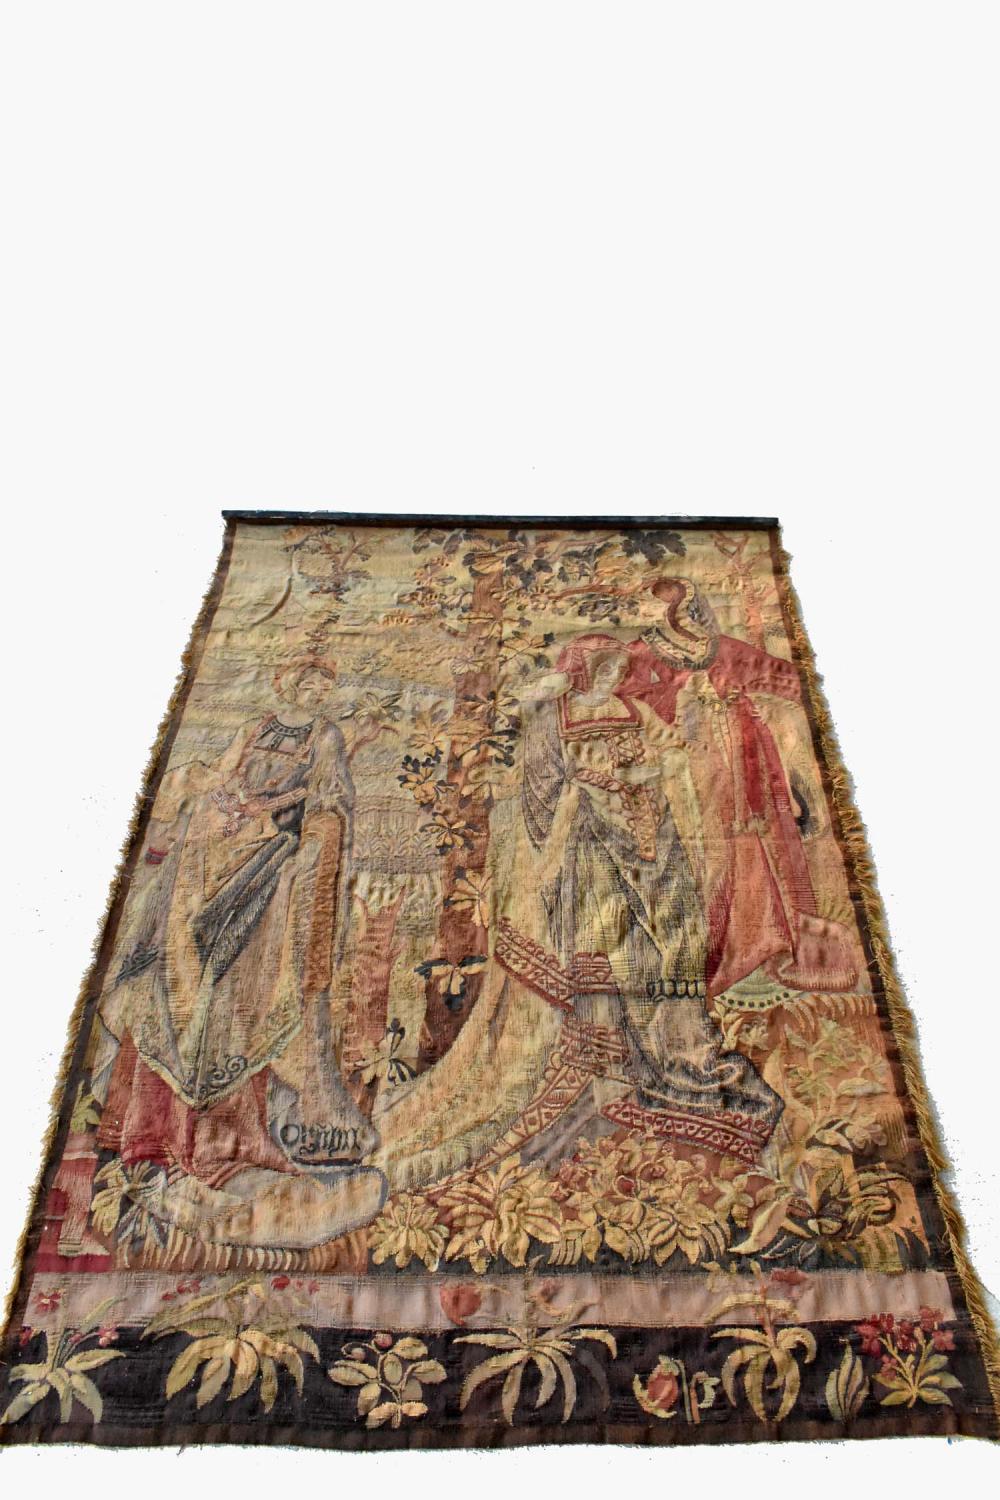 GOTHIC STYLE WOVEN TAPESTRY PANEL19th